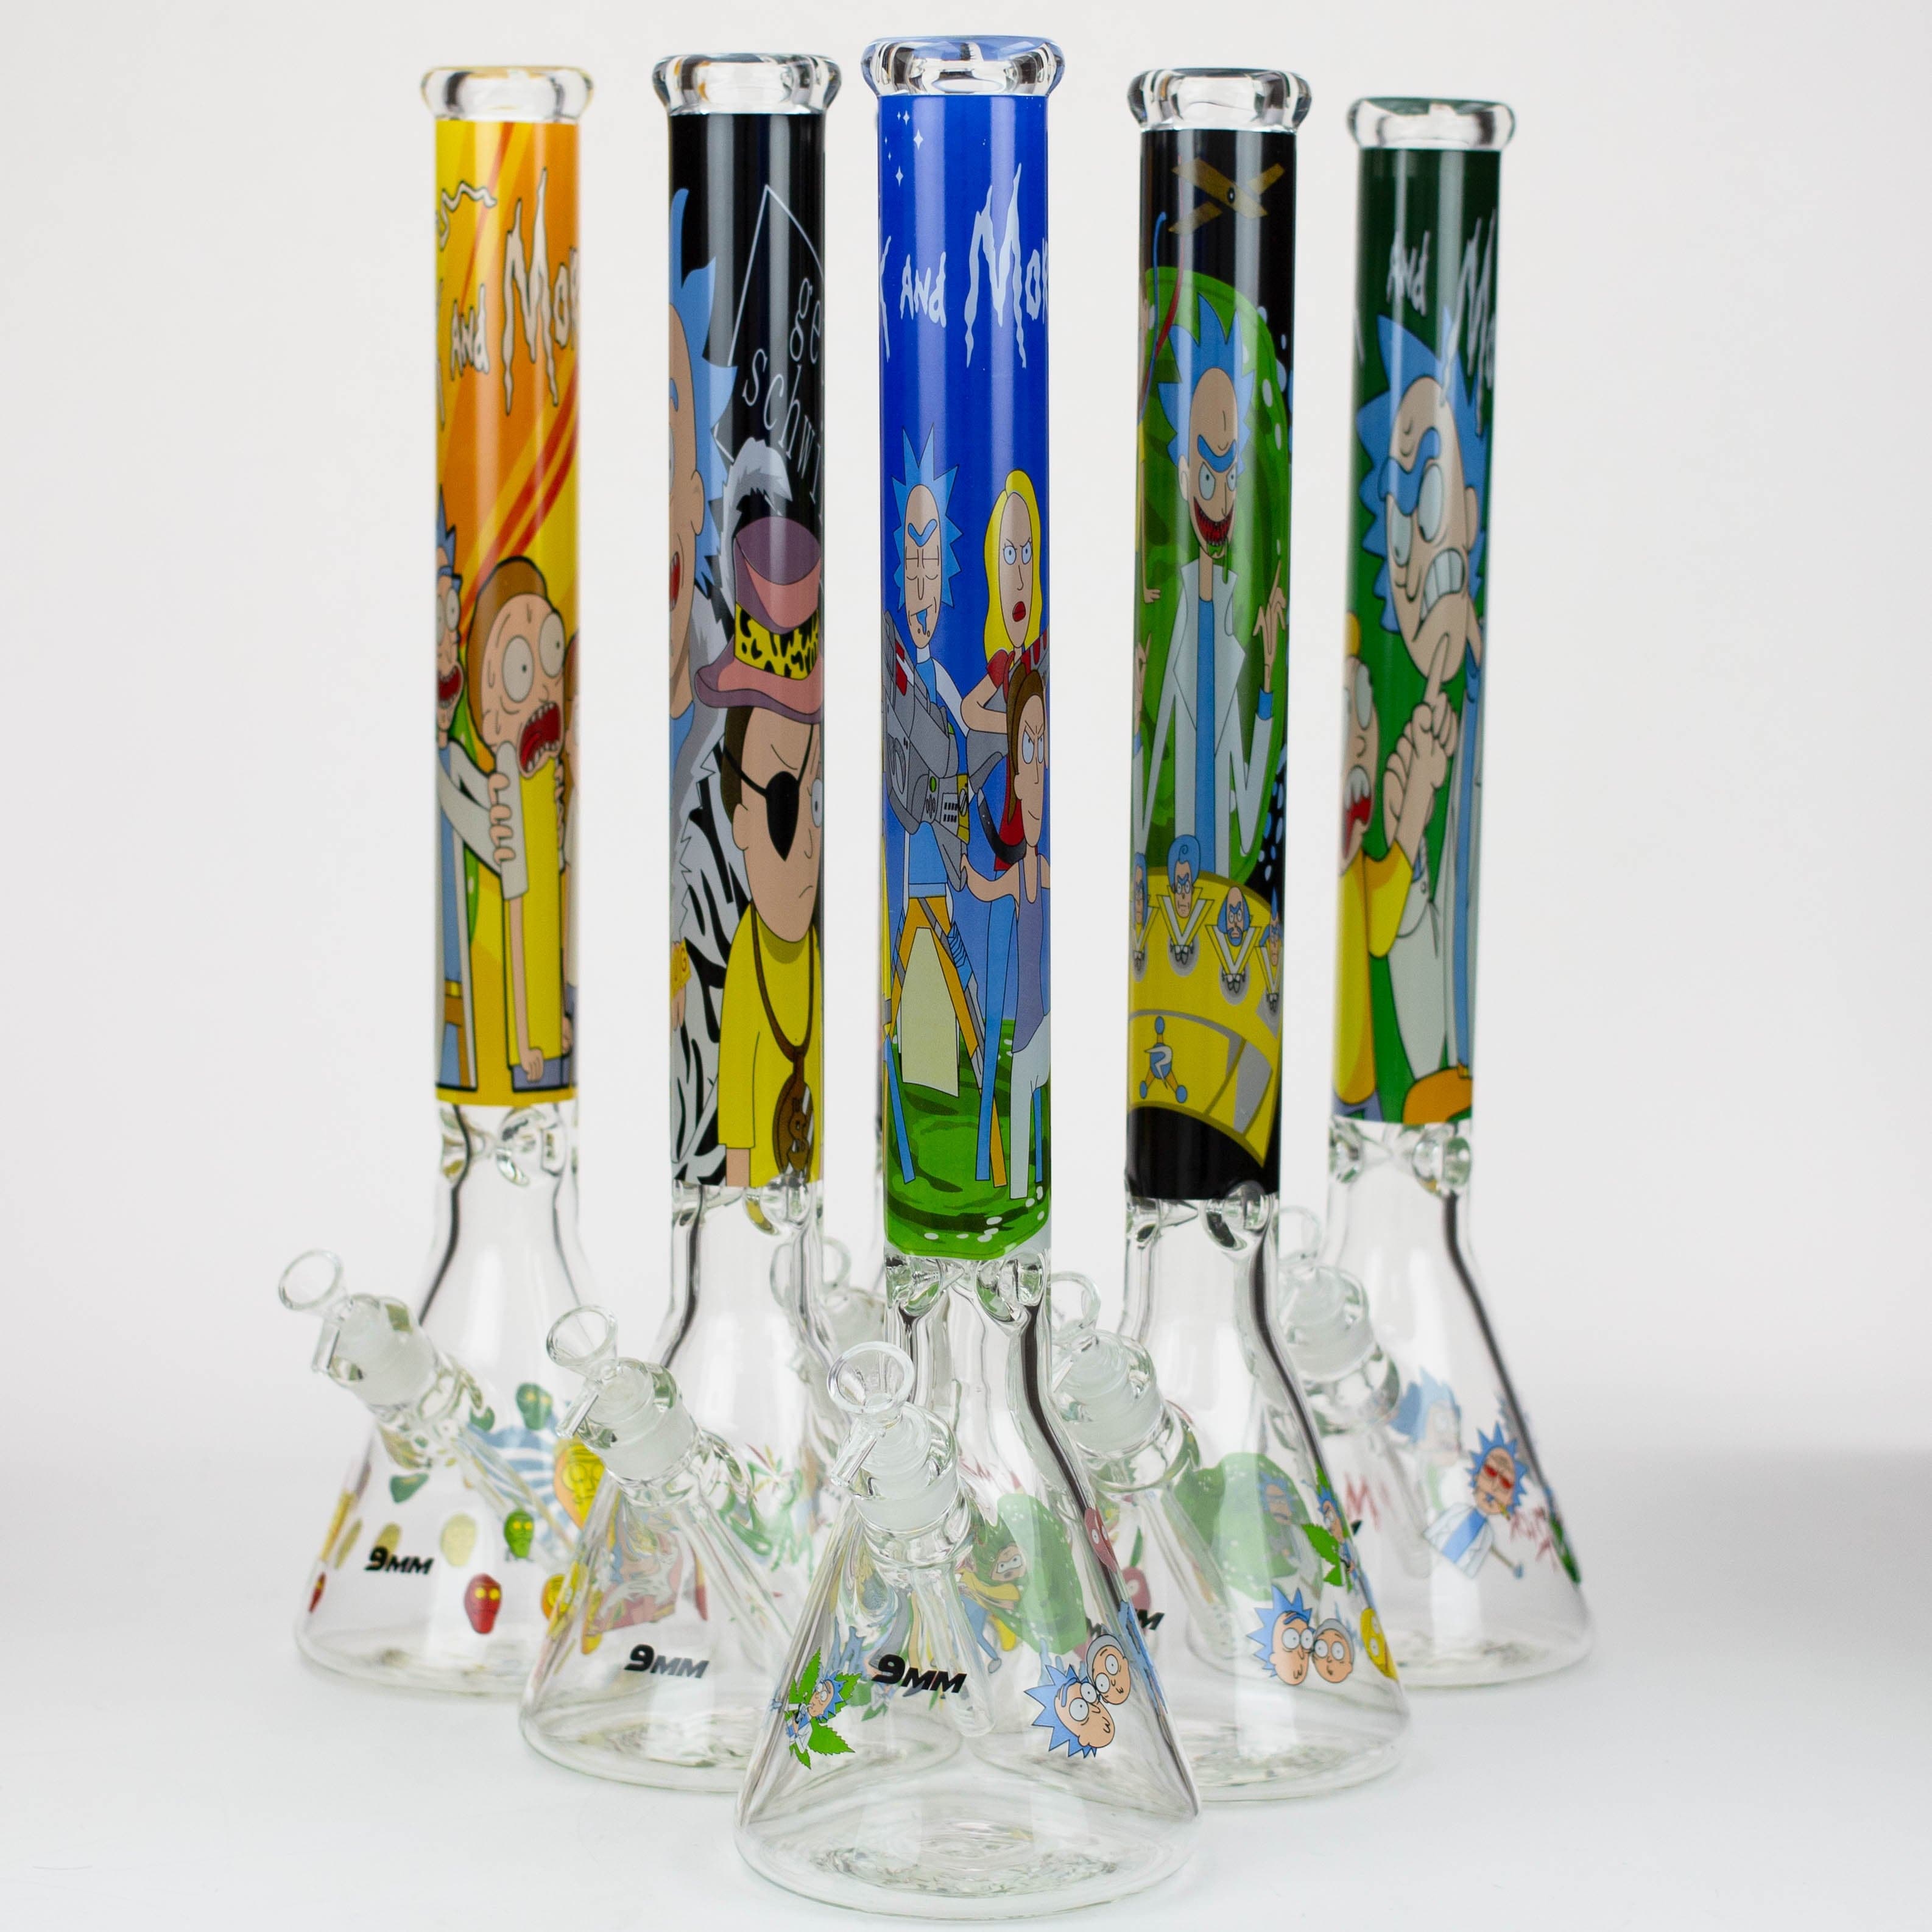 RM Cartoon 9 mm glass water pipes 22"_0